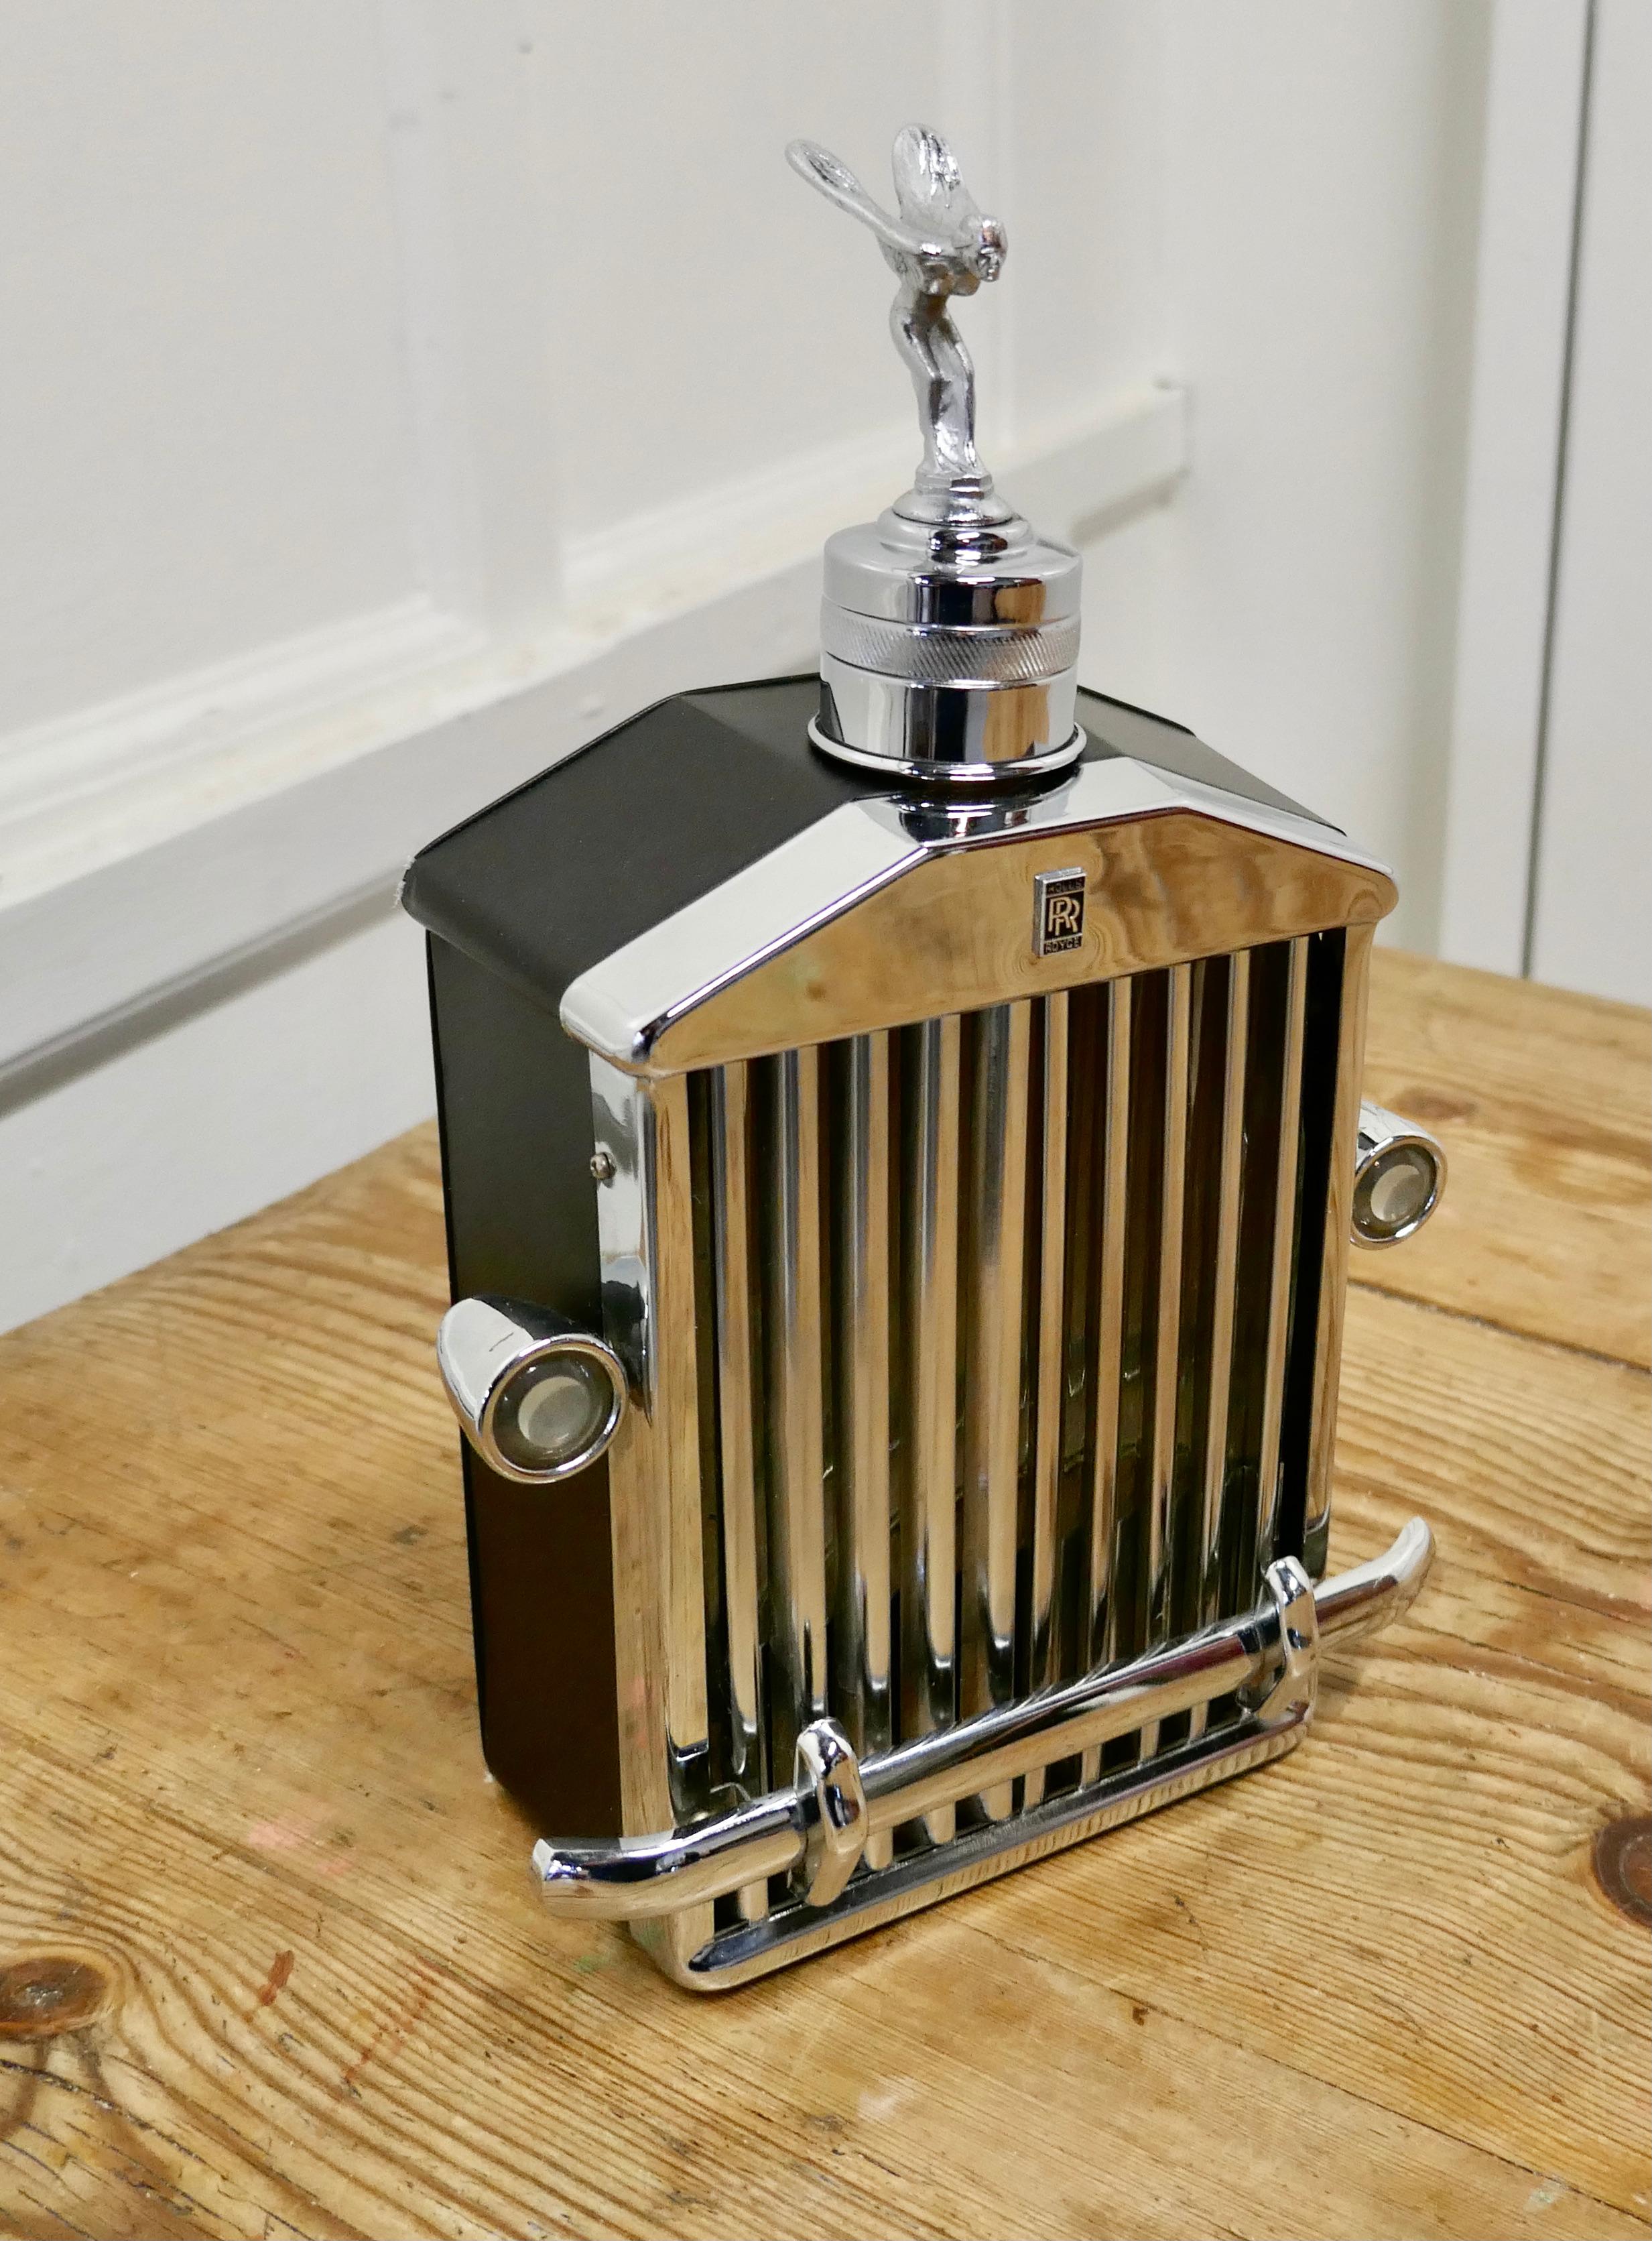 Rolls Royce radiator musical decanter sprit of Ecstasy Mascot

1960s-1970s Rare Rolls Royce musical decanter

Large desk ornament, Rolls Royce musical decanter with the “Silver Sprit of Ecstasy” Mascot by Charles Sykes Silver Spirit

This is a